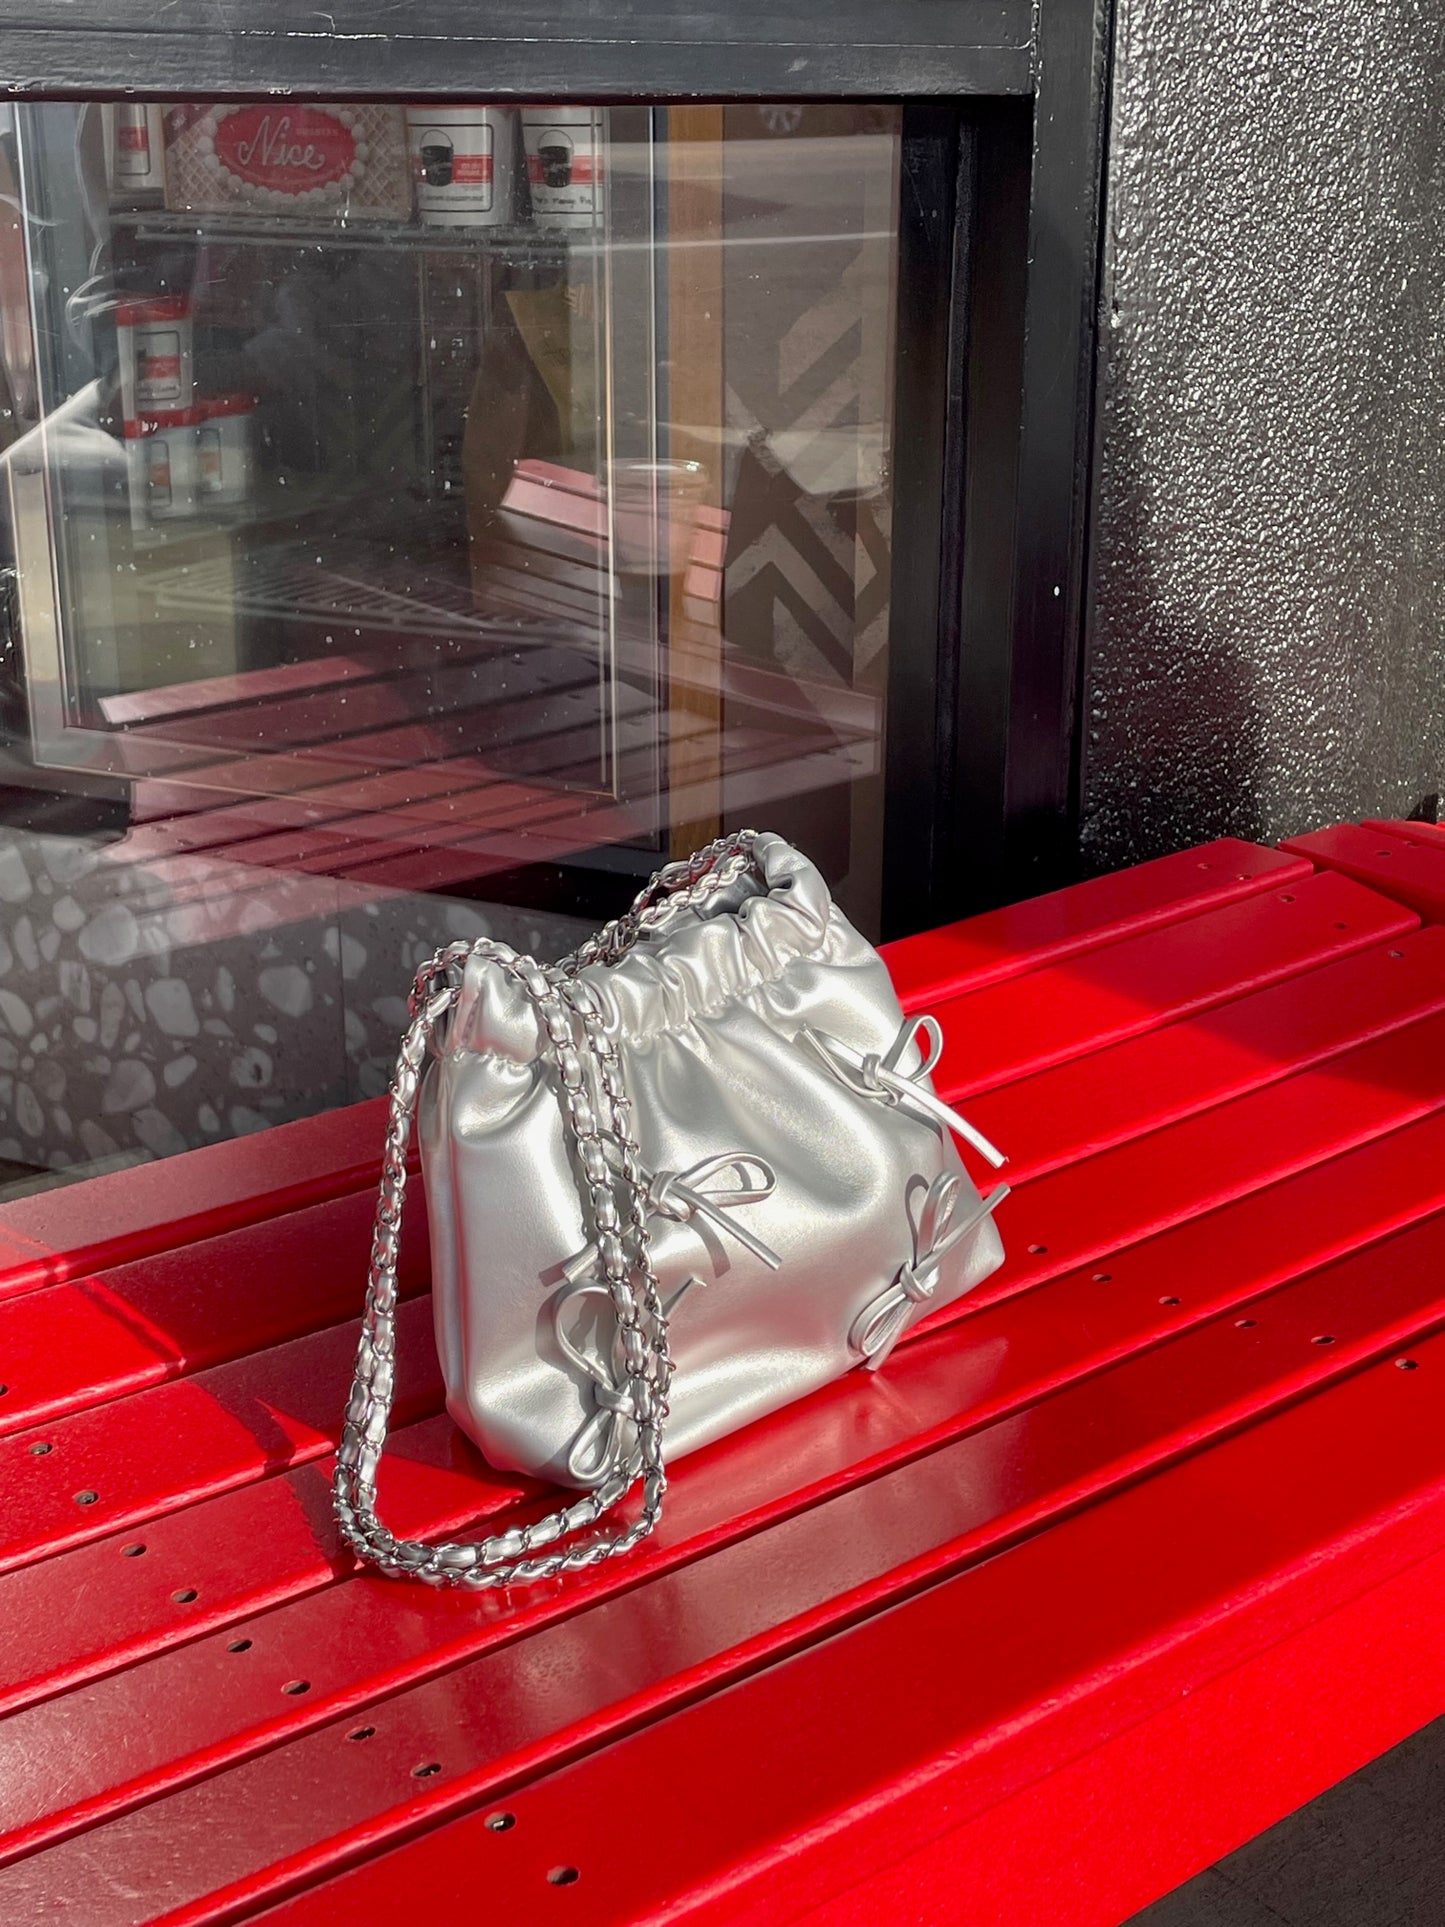 Lovely ♥ Silver Bow Chain Shoulder Bag